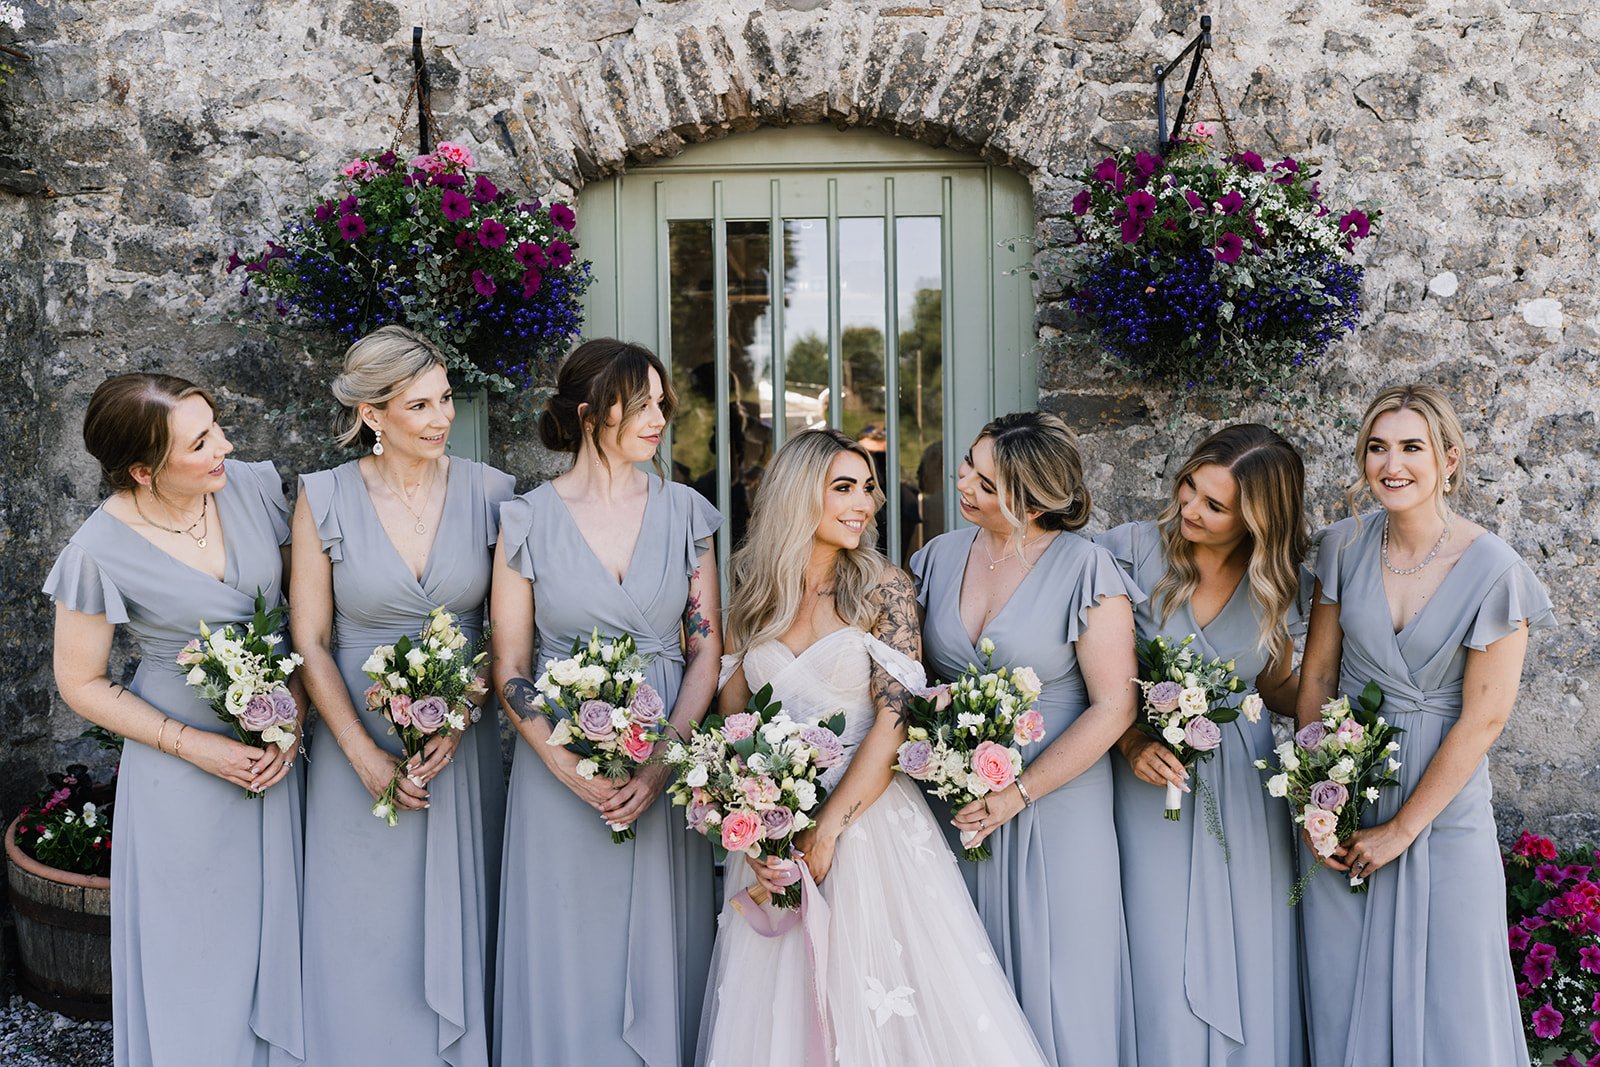  The bridal party are all stood holding their romantic, pastel wedding bouquets in front of them.  The bride is standing in the middle of her bridesmaids who are all looking towards her.   Photo by Oliver Rees Photography 